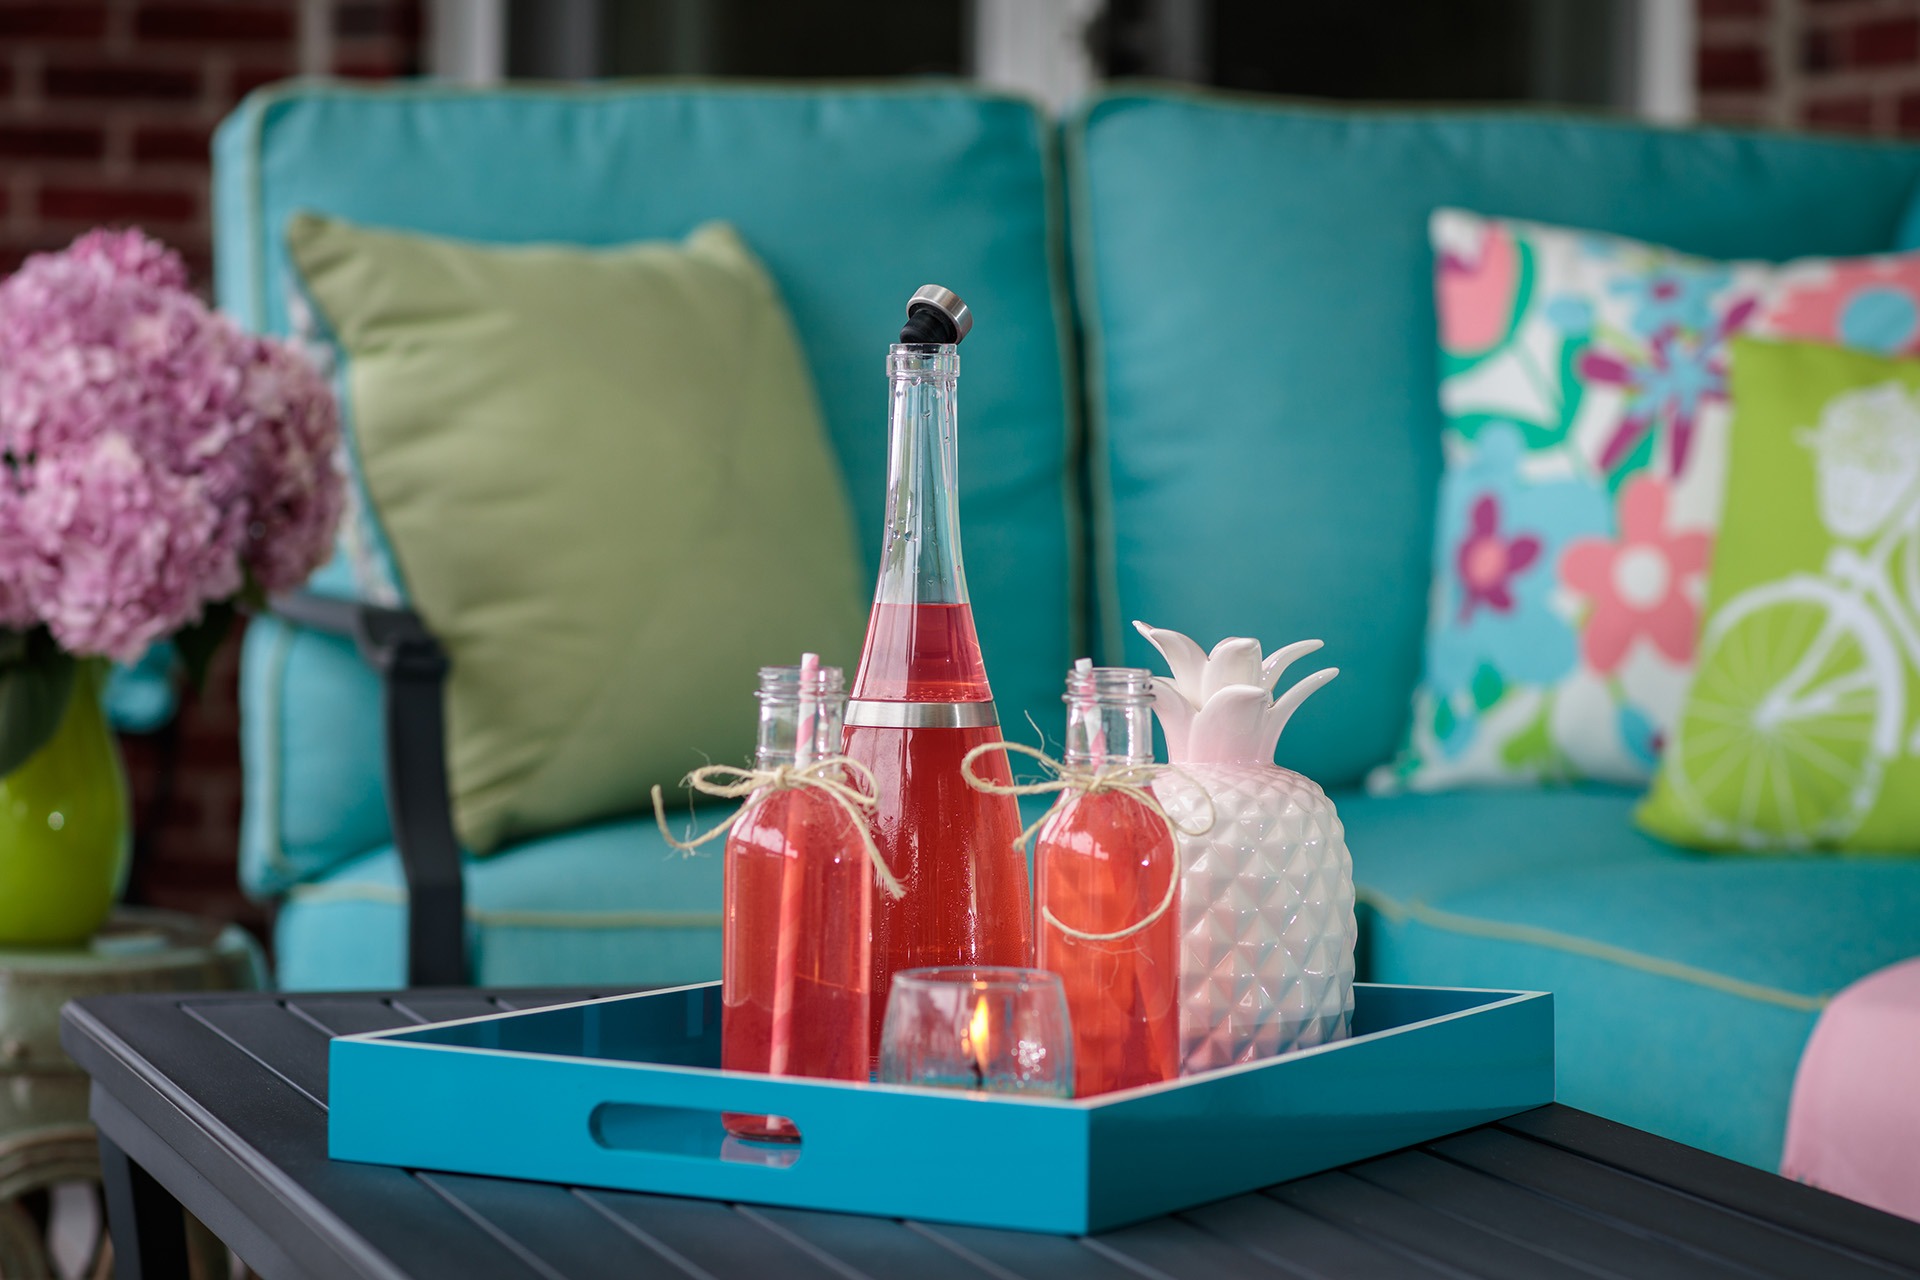 Prepare your patio for the perfect summertime party